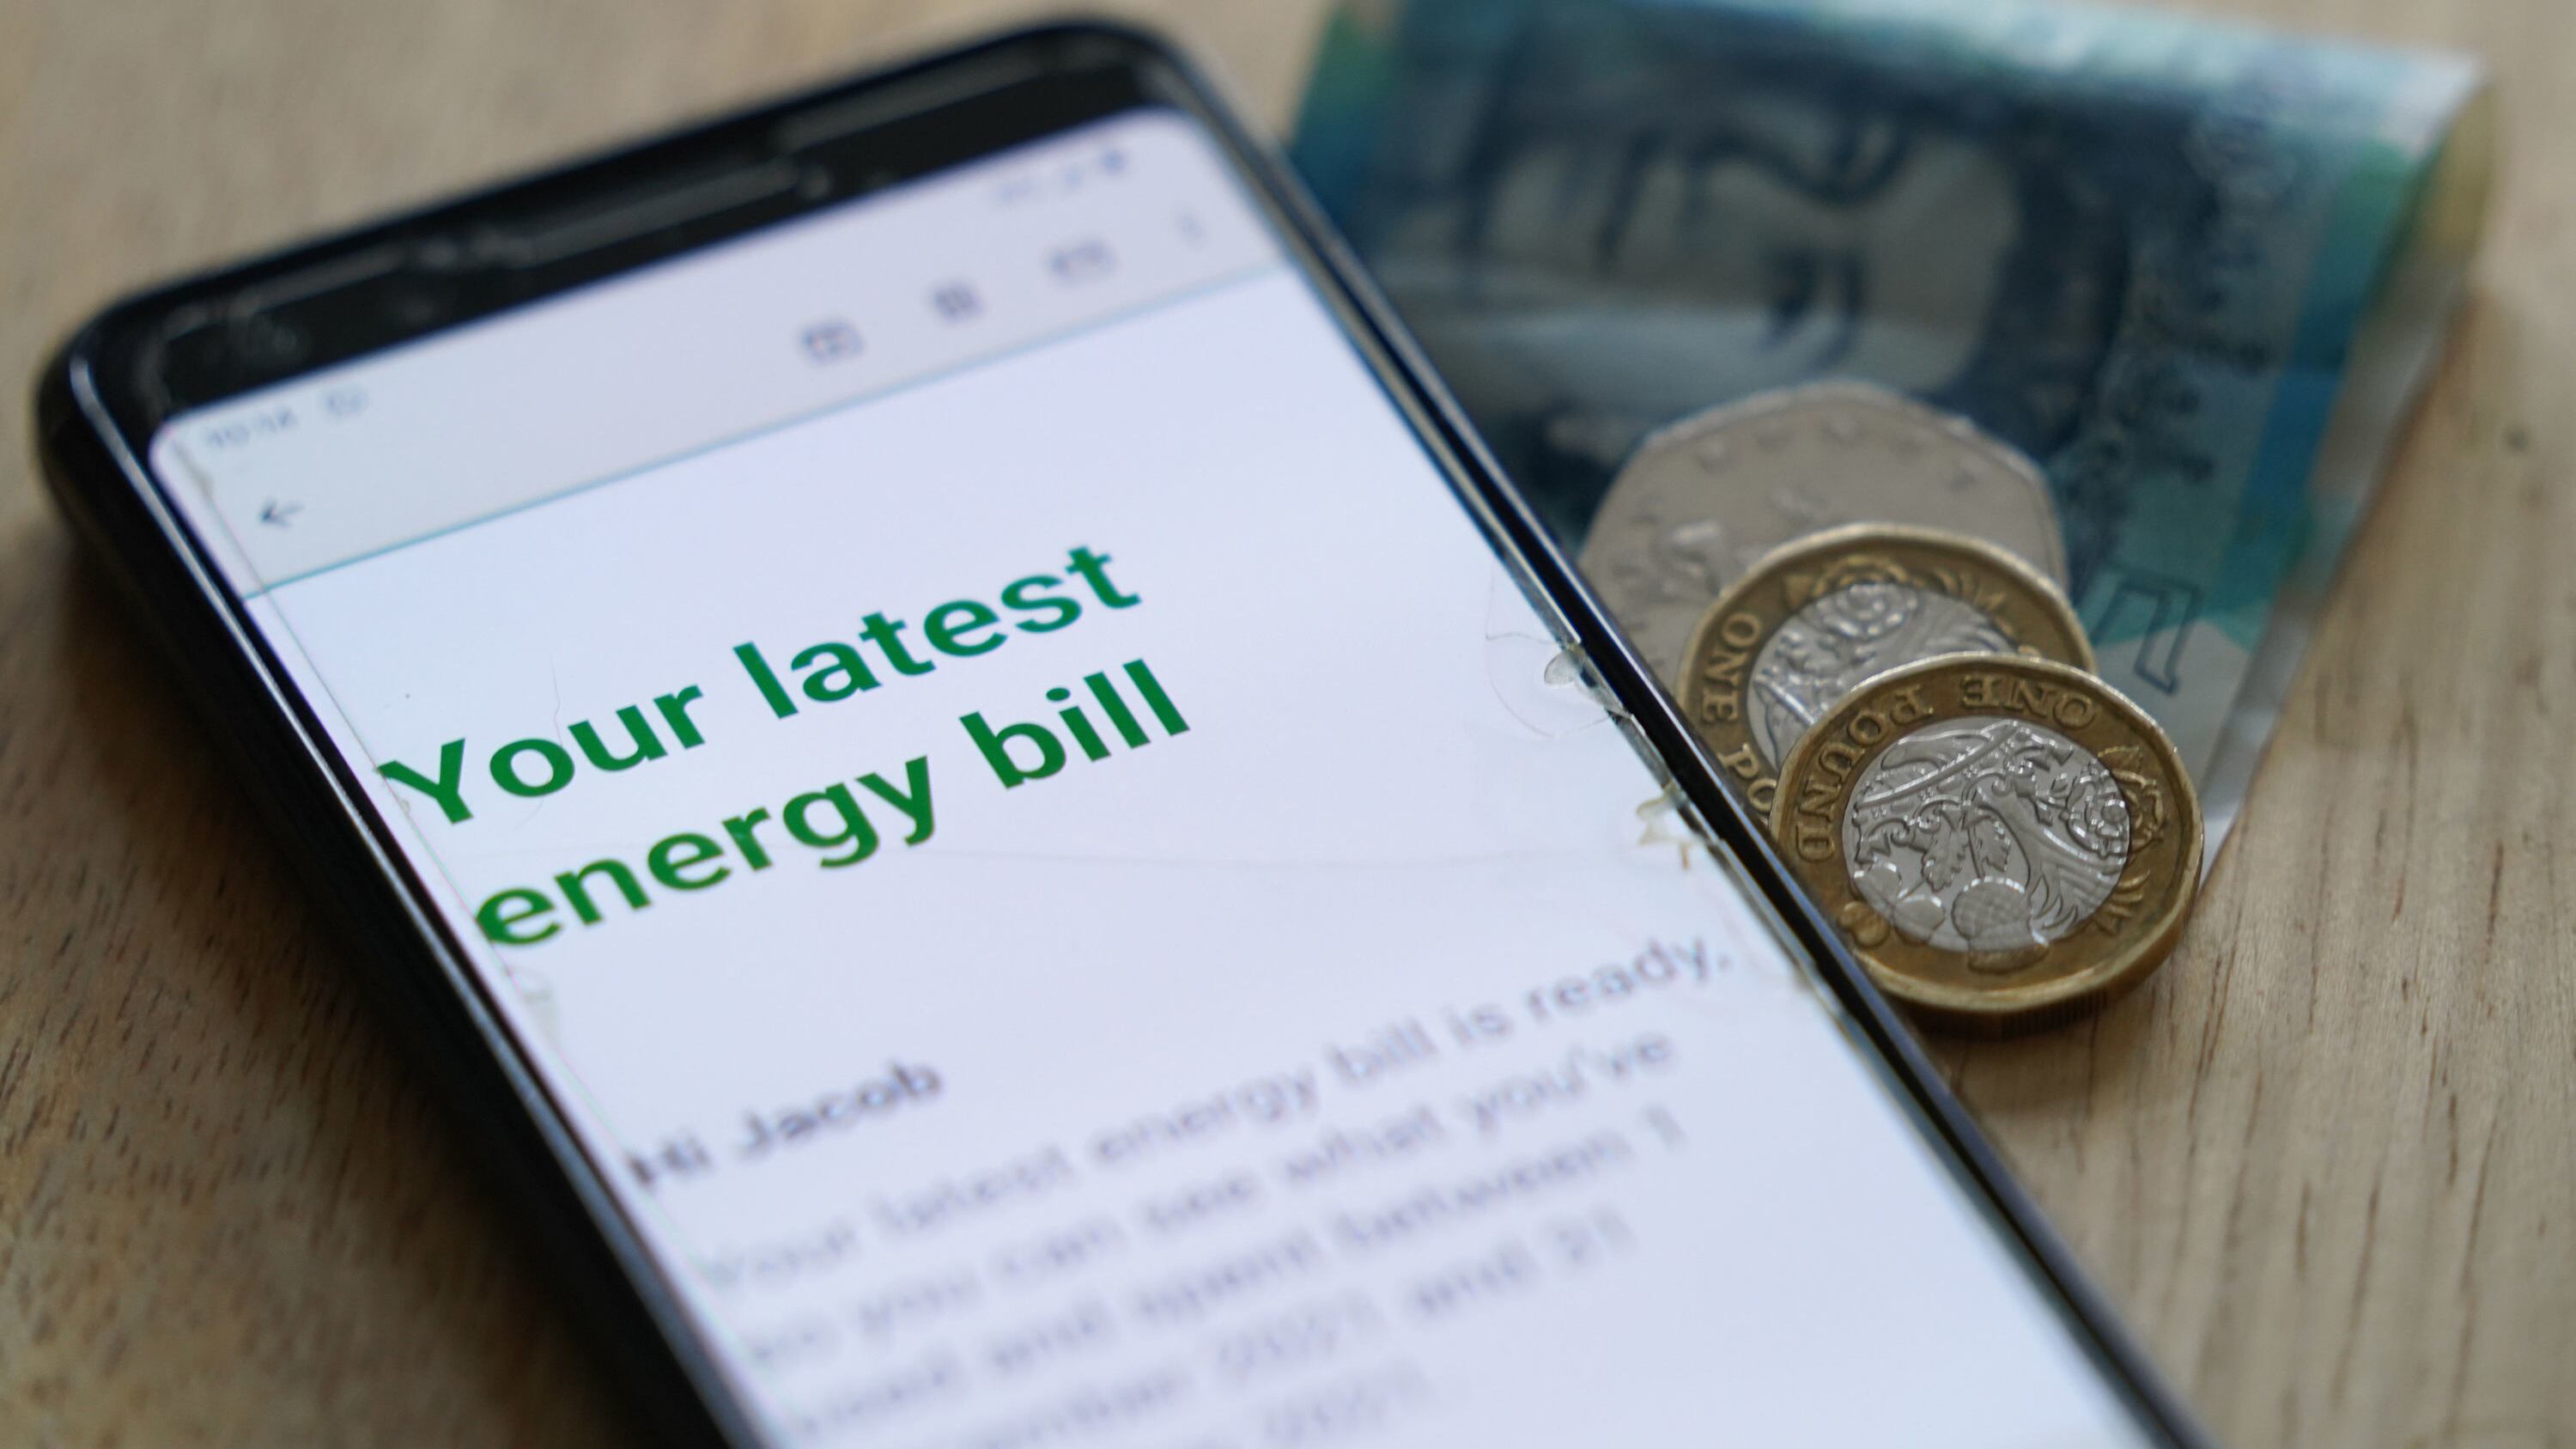 The typical household energy bill will fall by £122 a year from July, said Ofgem